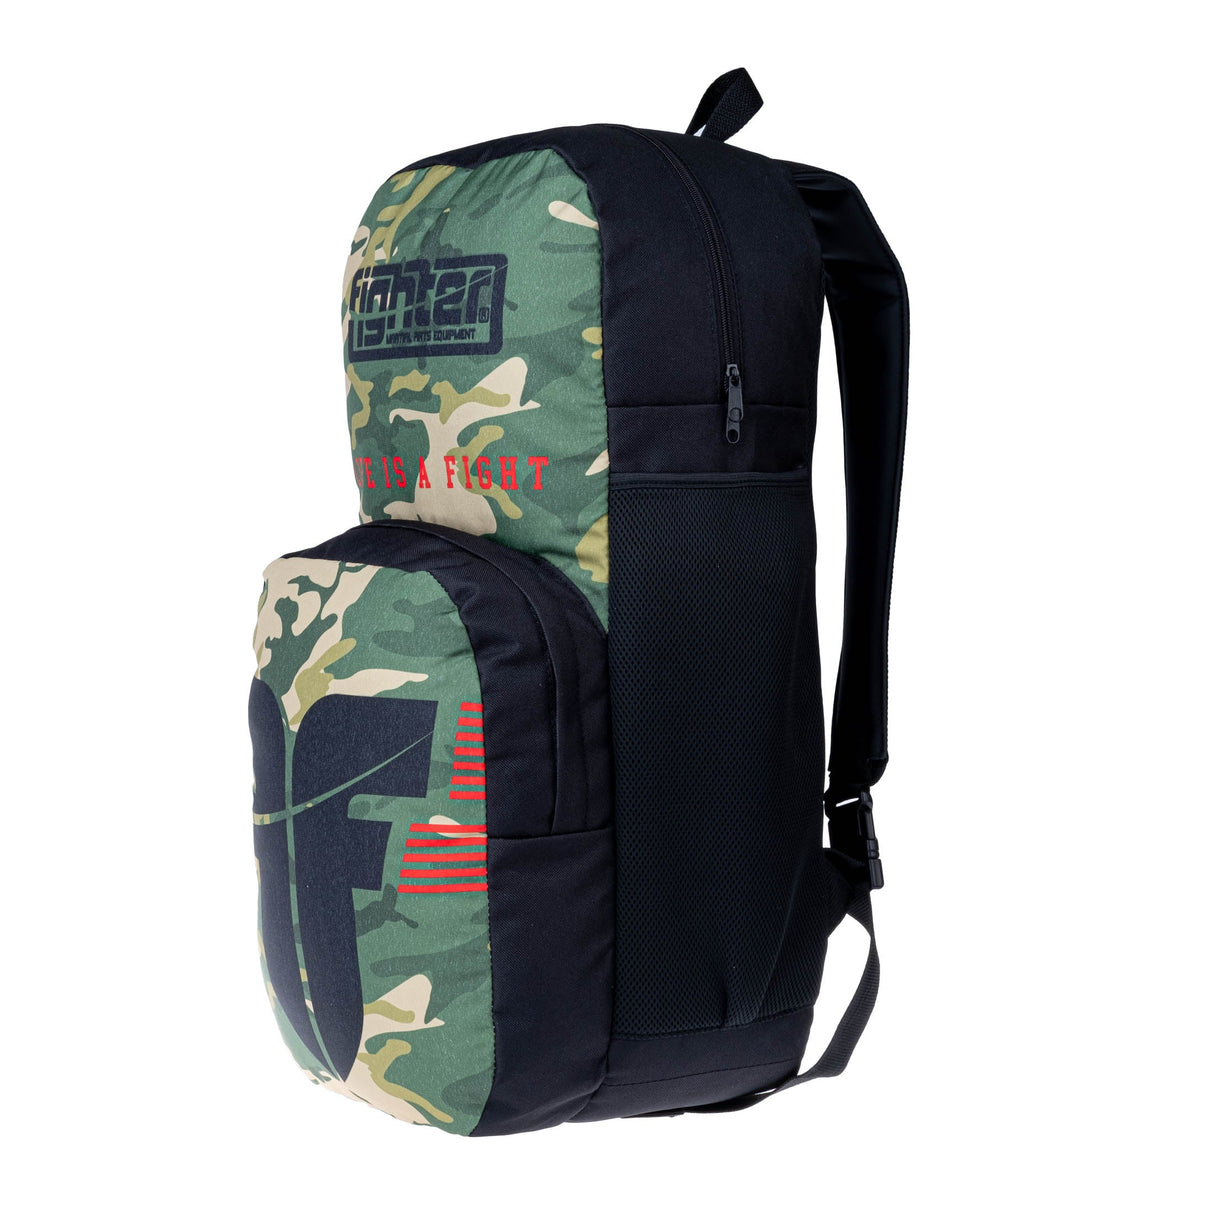 Sac à dos Fighter Squad - camouflage vert